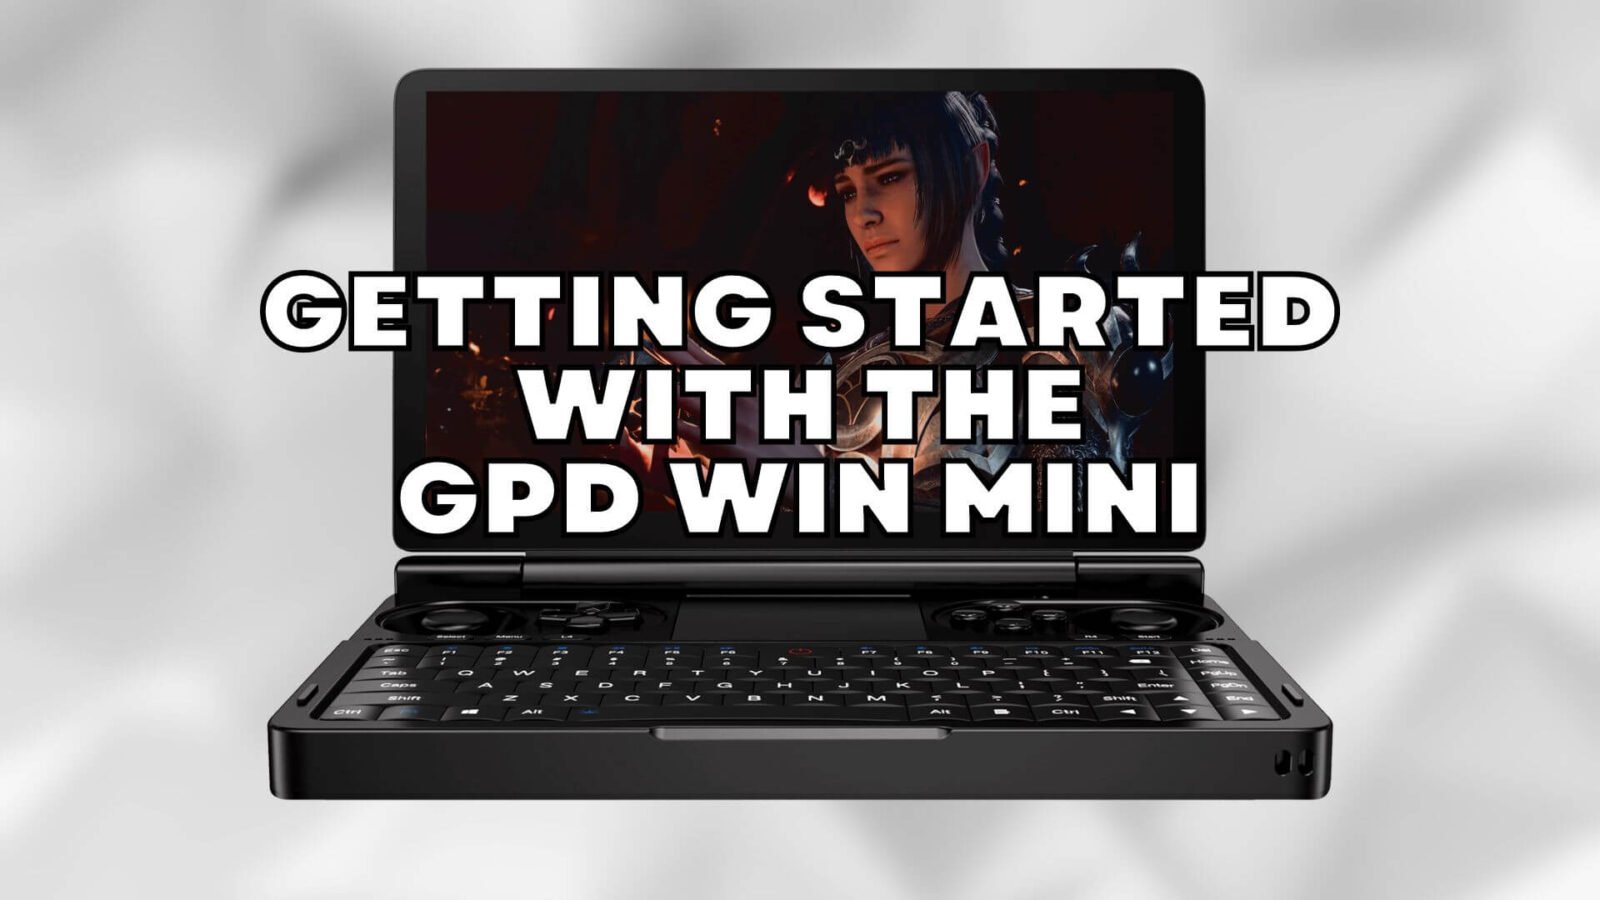 Getting started with the GPD WIN Mini